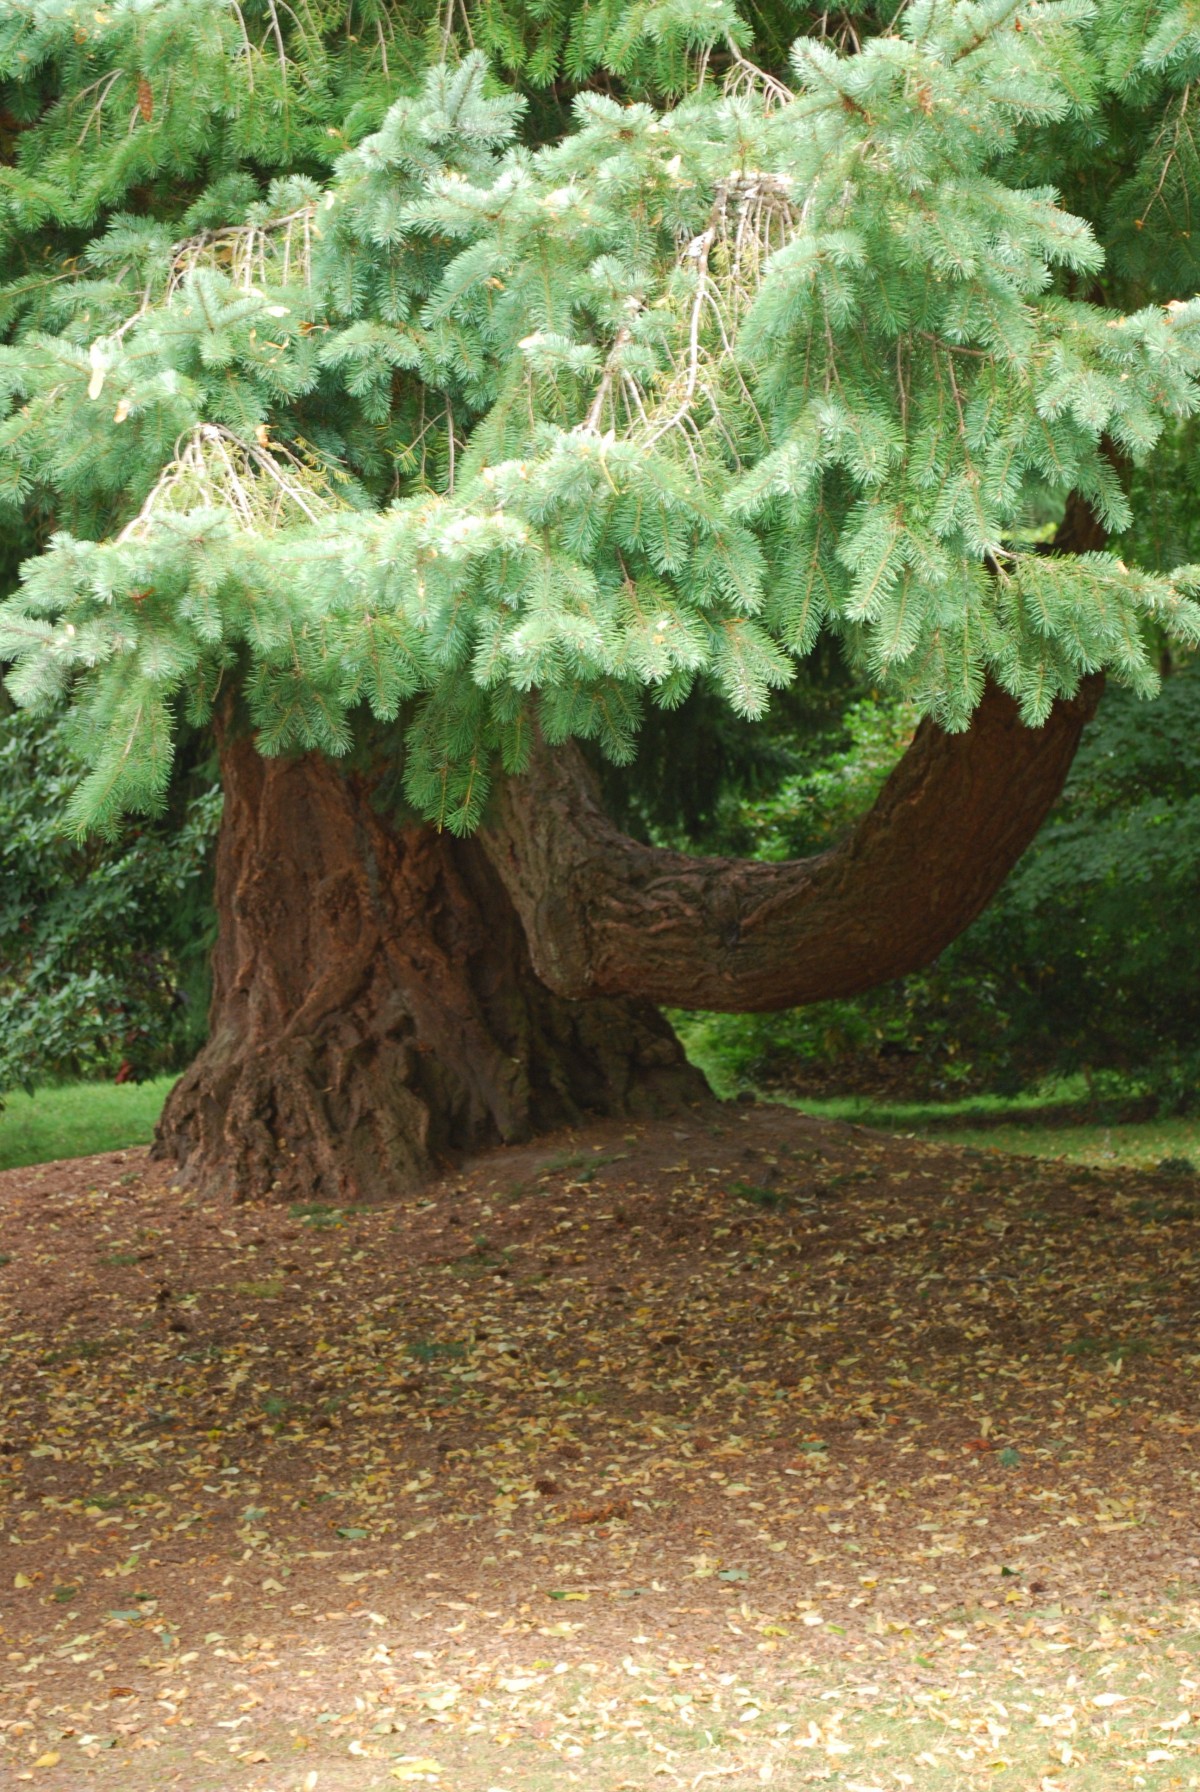 David Douglas was born in the village of Scone in 1799 and worked as a gardener at Scone Palace for seven years. Douglas went on to become an explorer and a great plant hunter and the Douglas Fir is named after him.